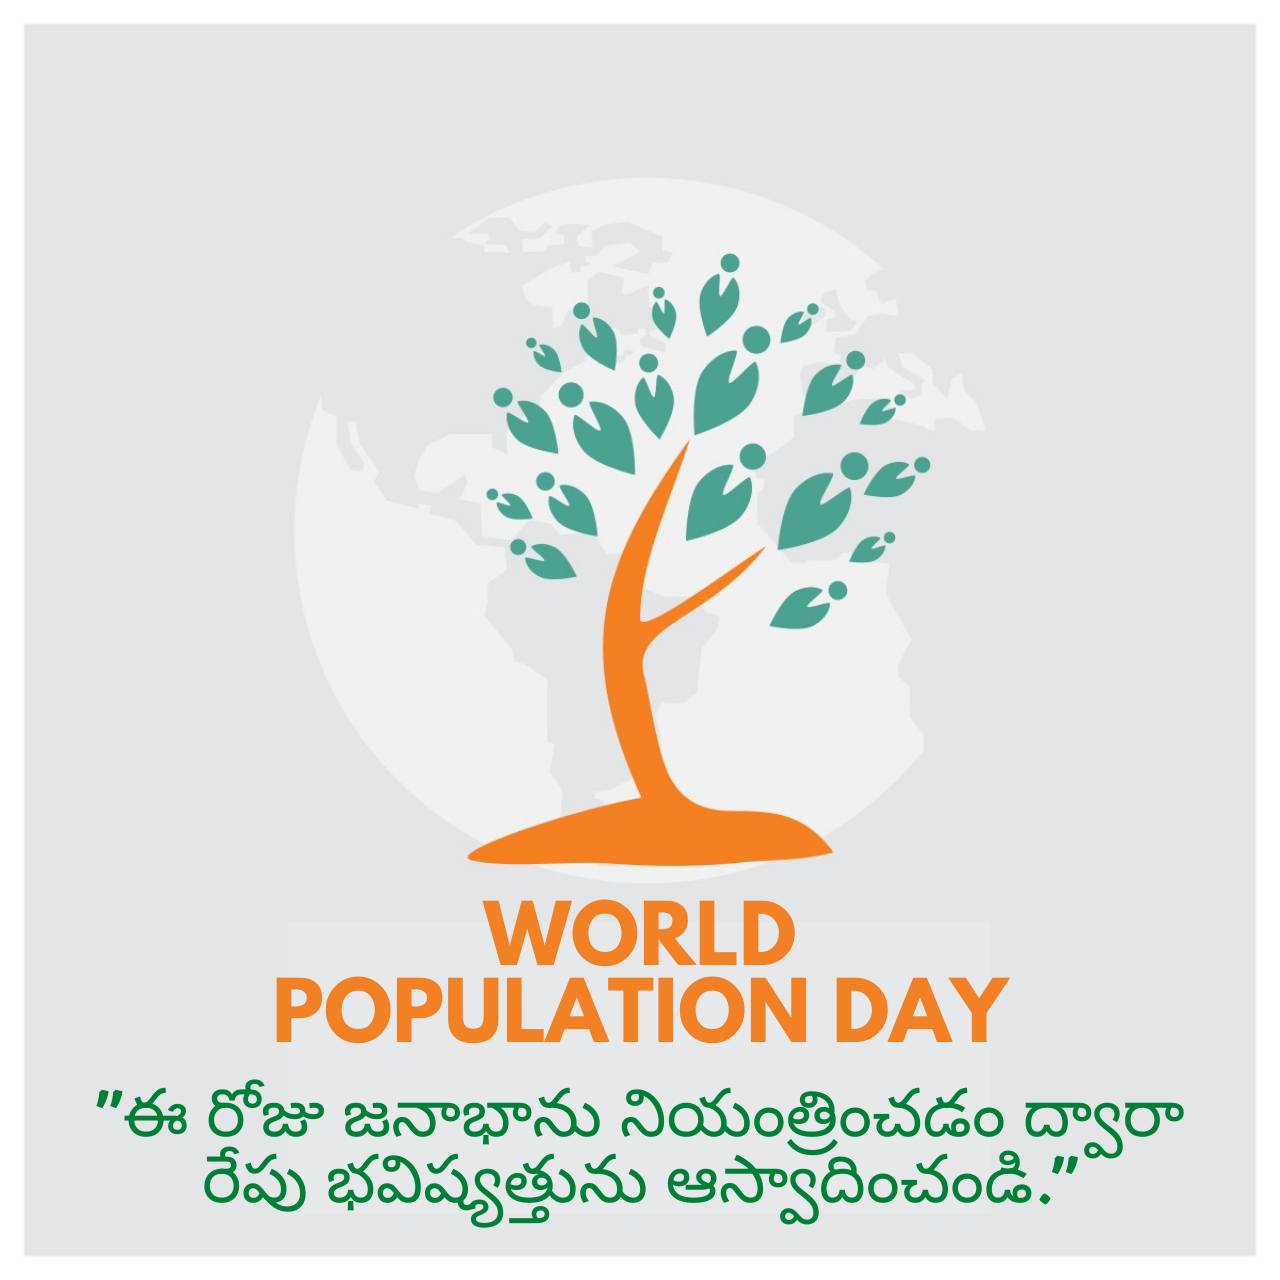 World Population Day 2021: Telugu and Malayalam Quotes, Slogans, Messages, and Status to spread awareness about Overpopulation issues